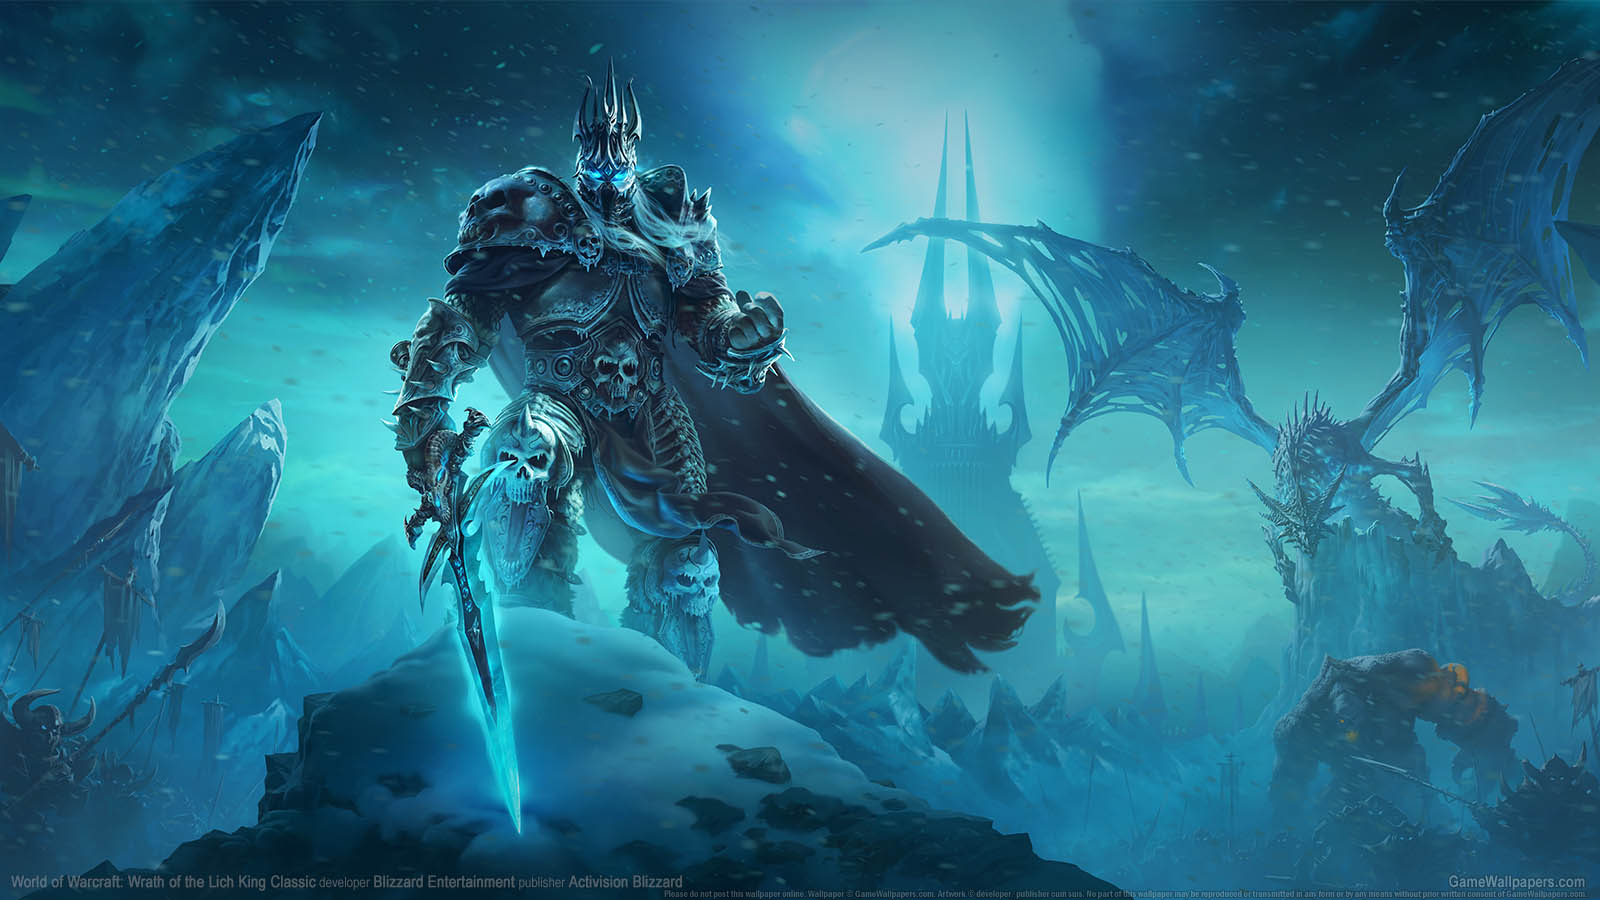 World of Warcraft: Wrath of the Lich King Classic achtergrond 01 1600x900